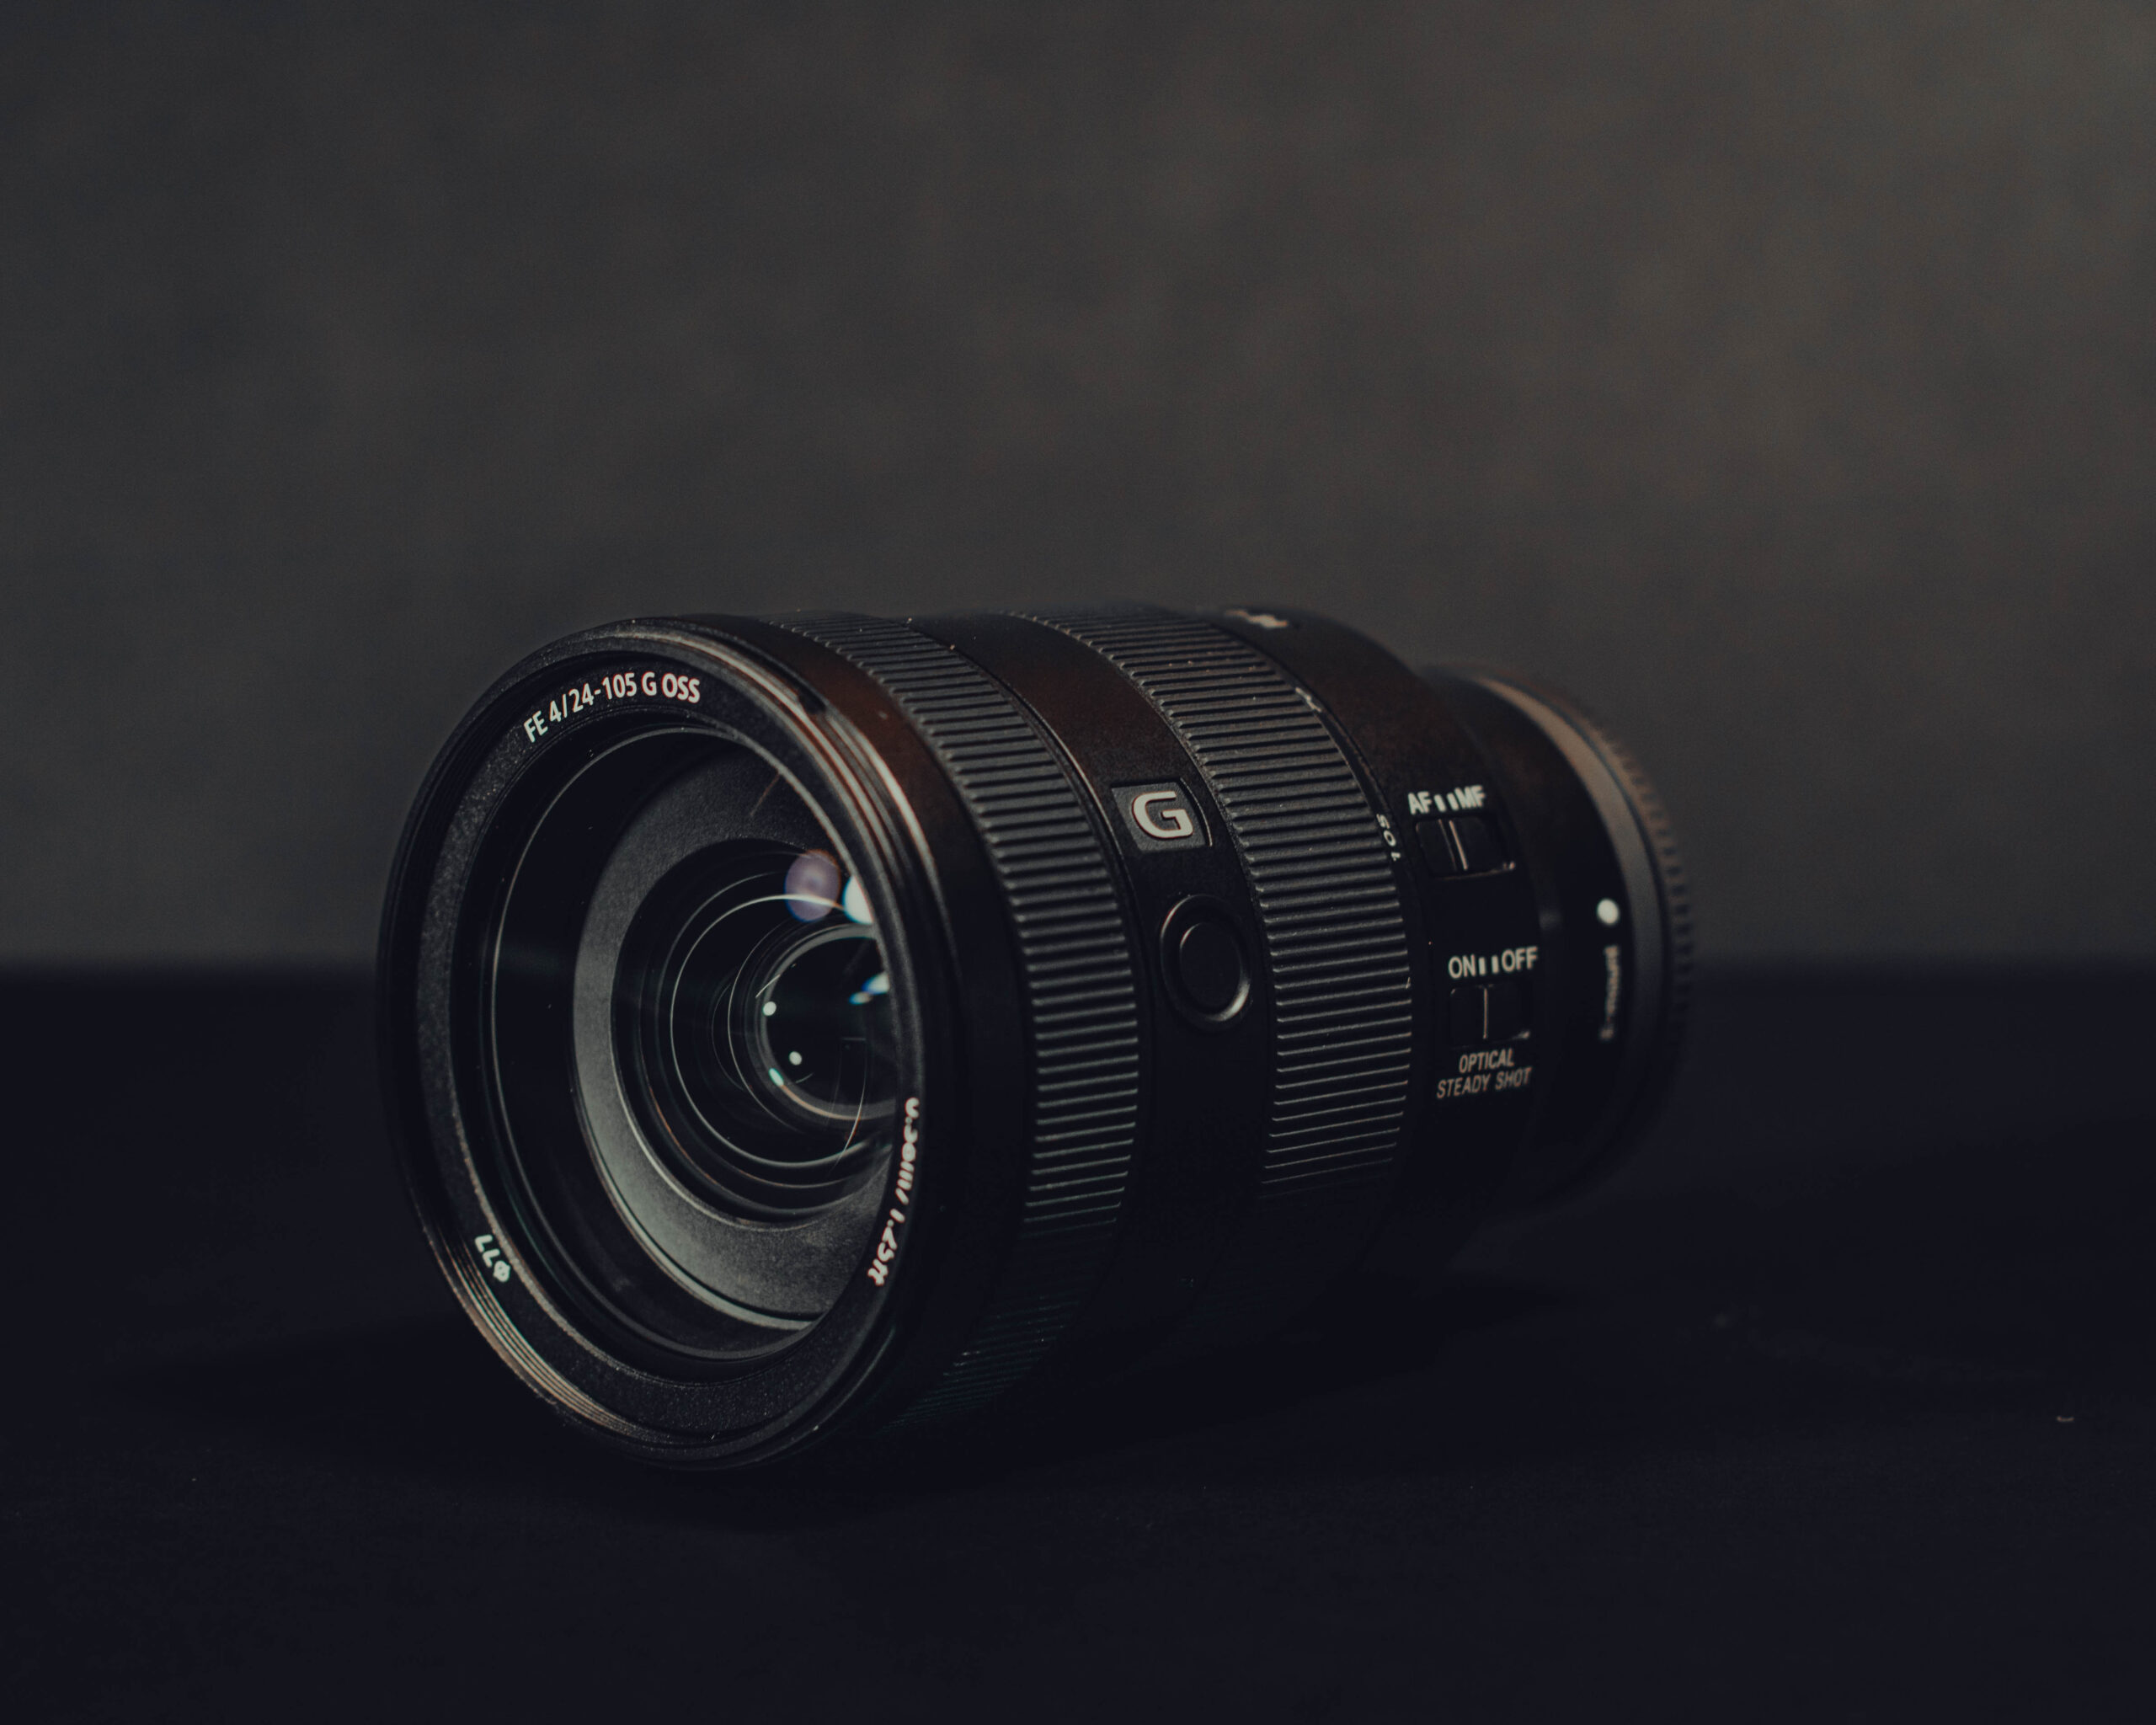 Photo of our Sony 24-105mm camera lens available in our camera equipment for hire shop in Cardiff.